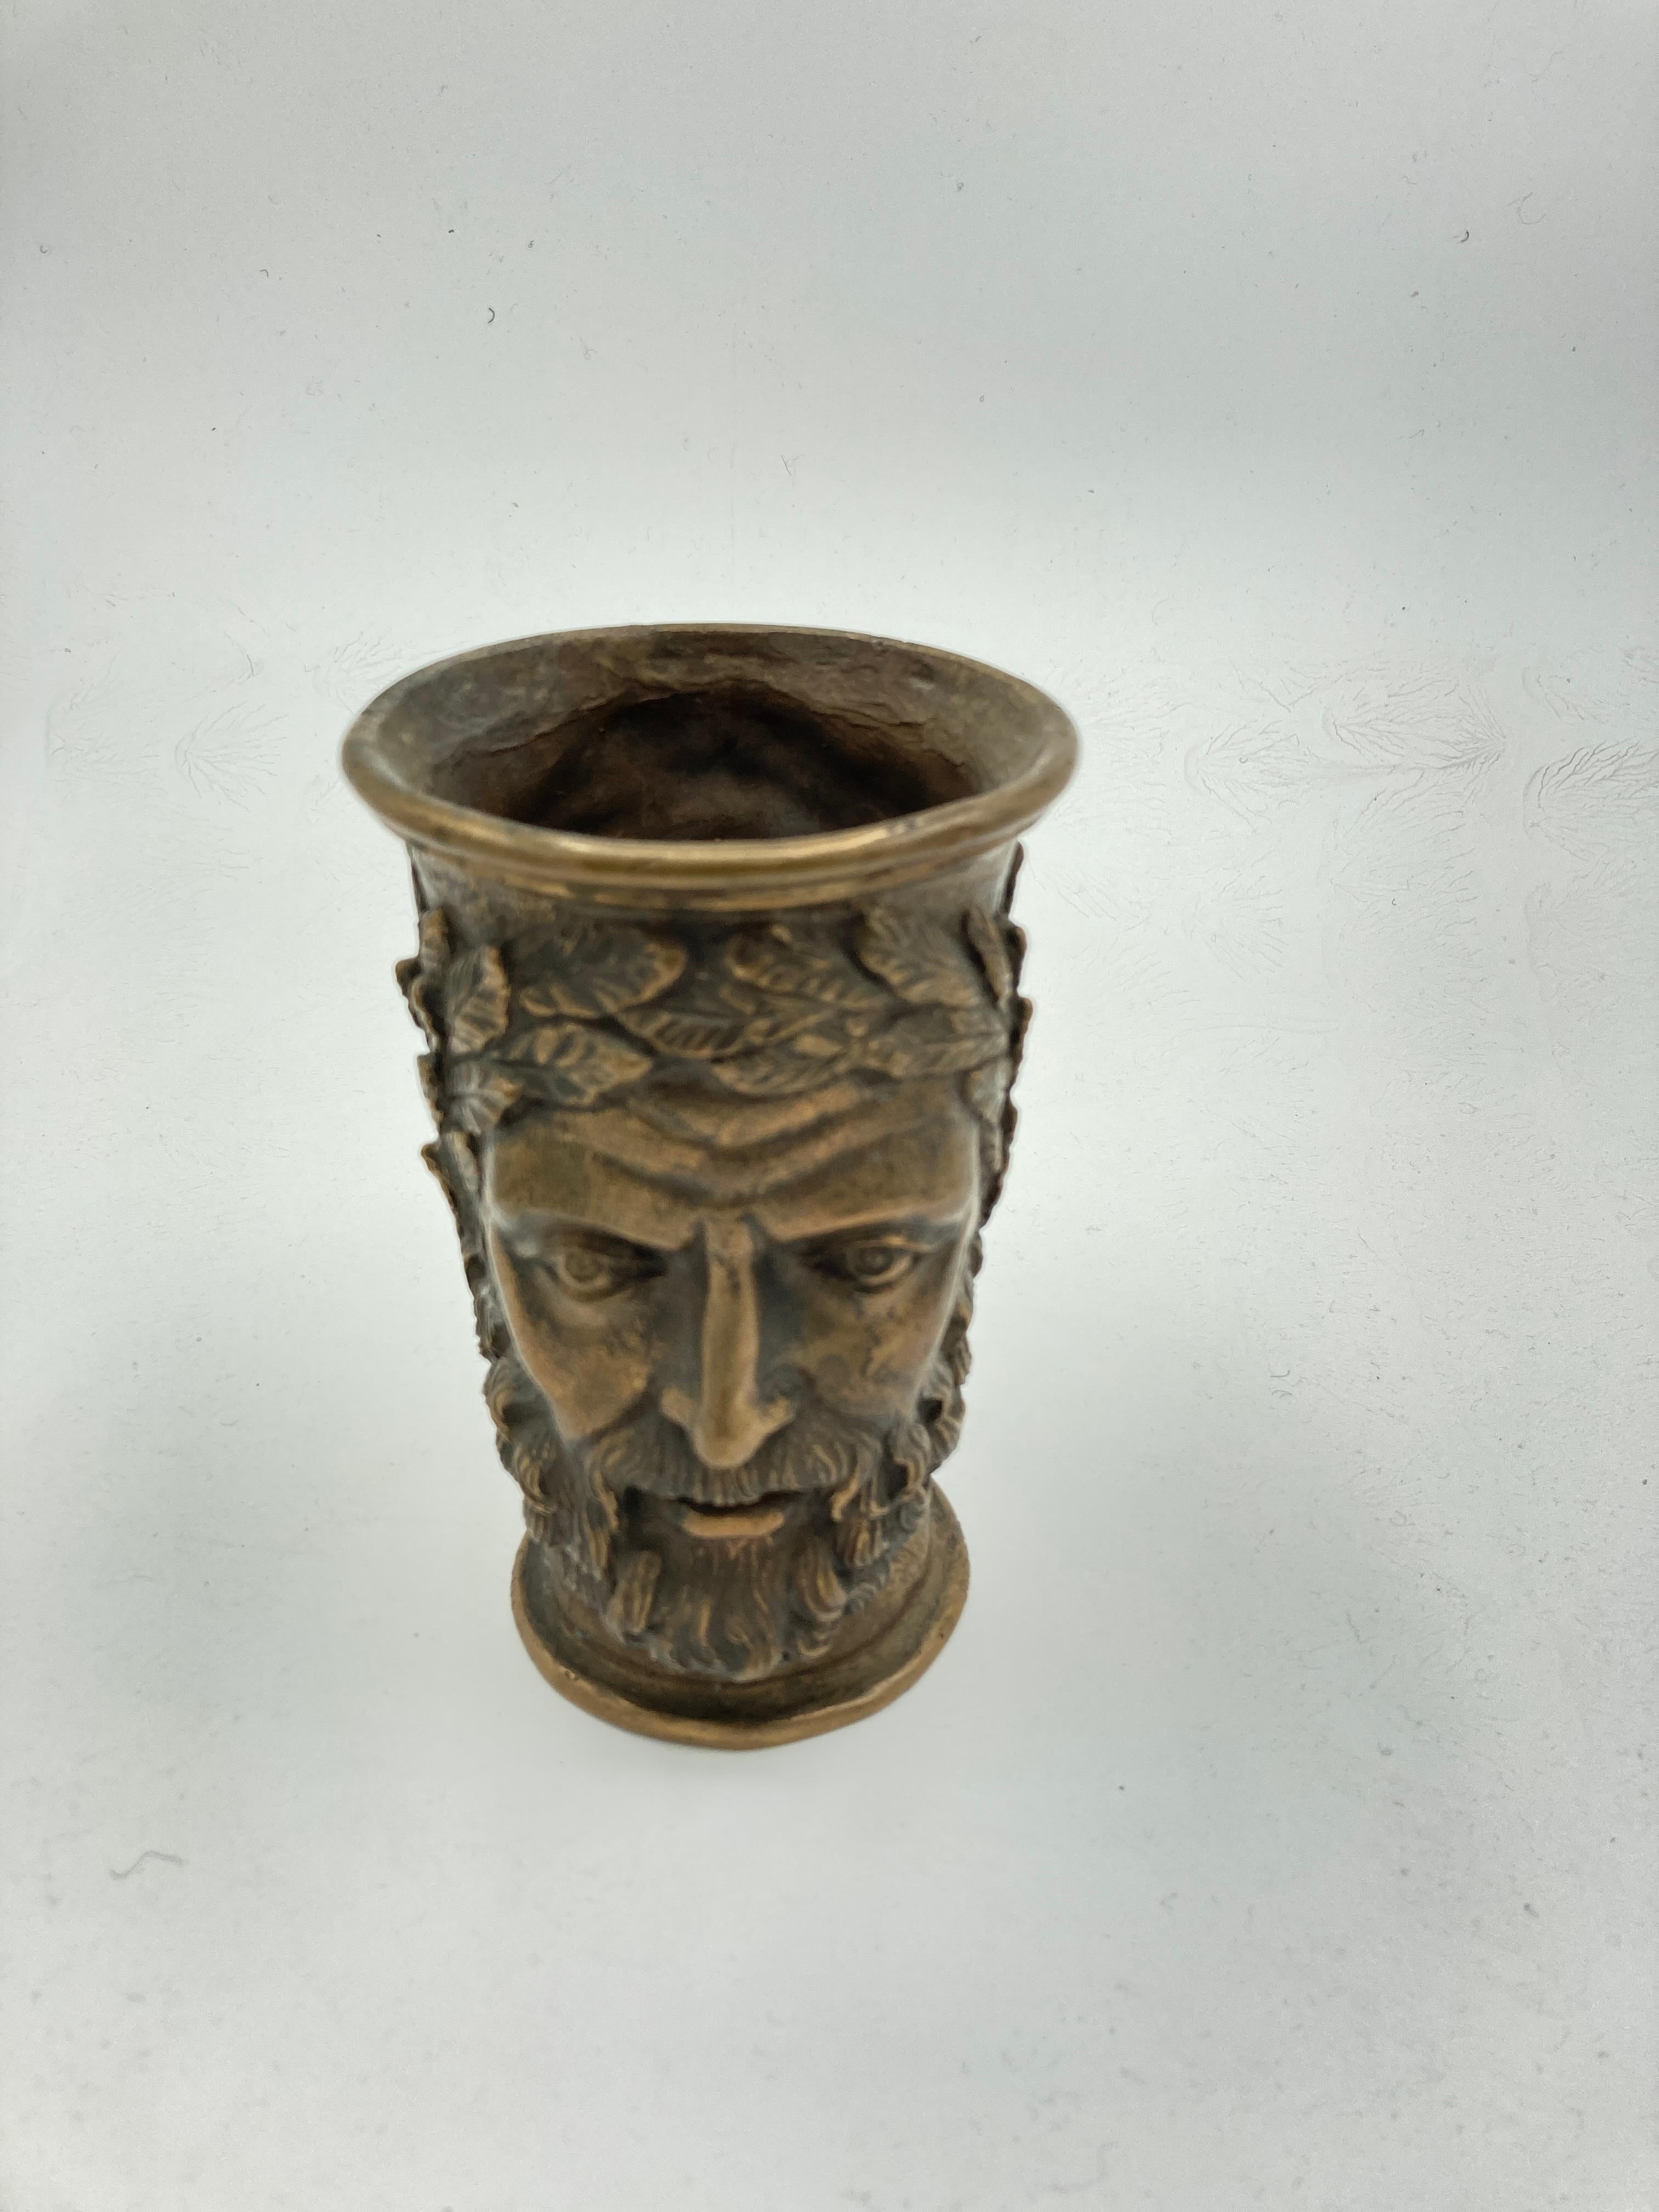 Very nice antique vase showing two  Roman heads
Italy
Circa 1940's
